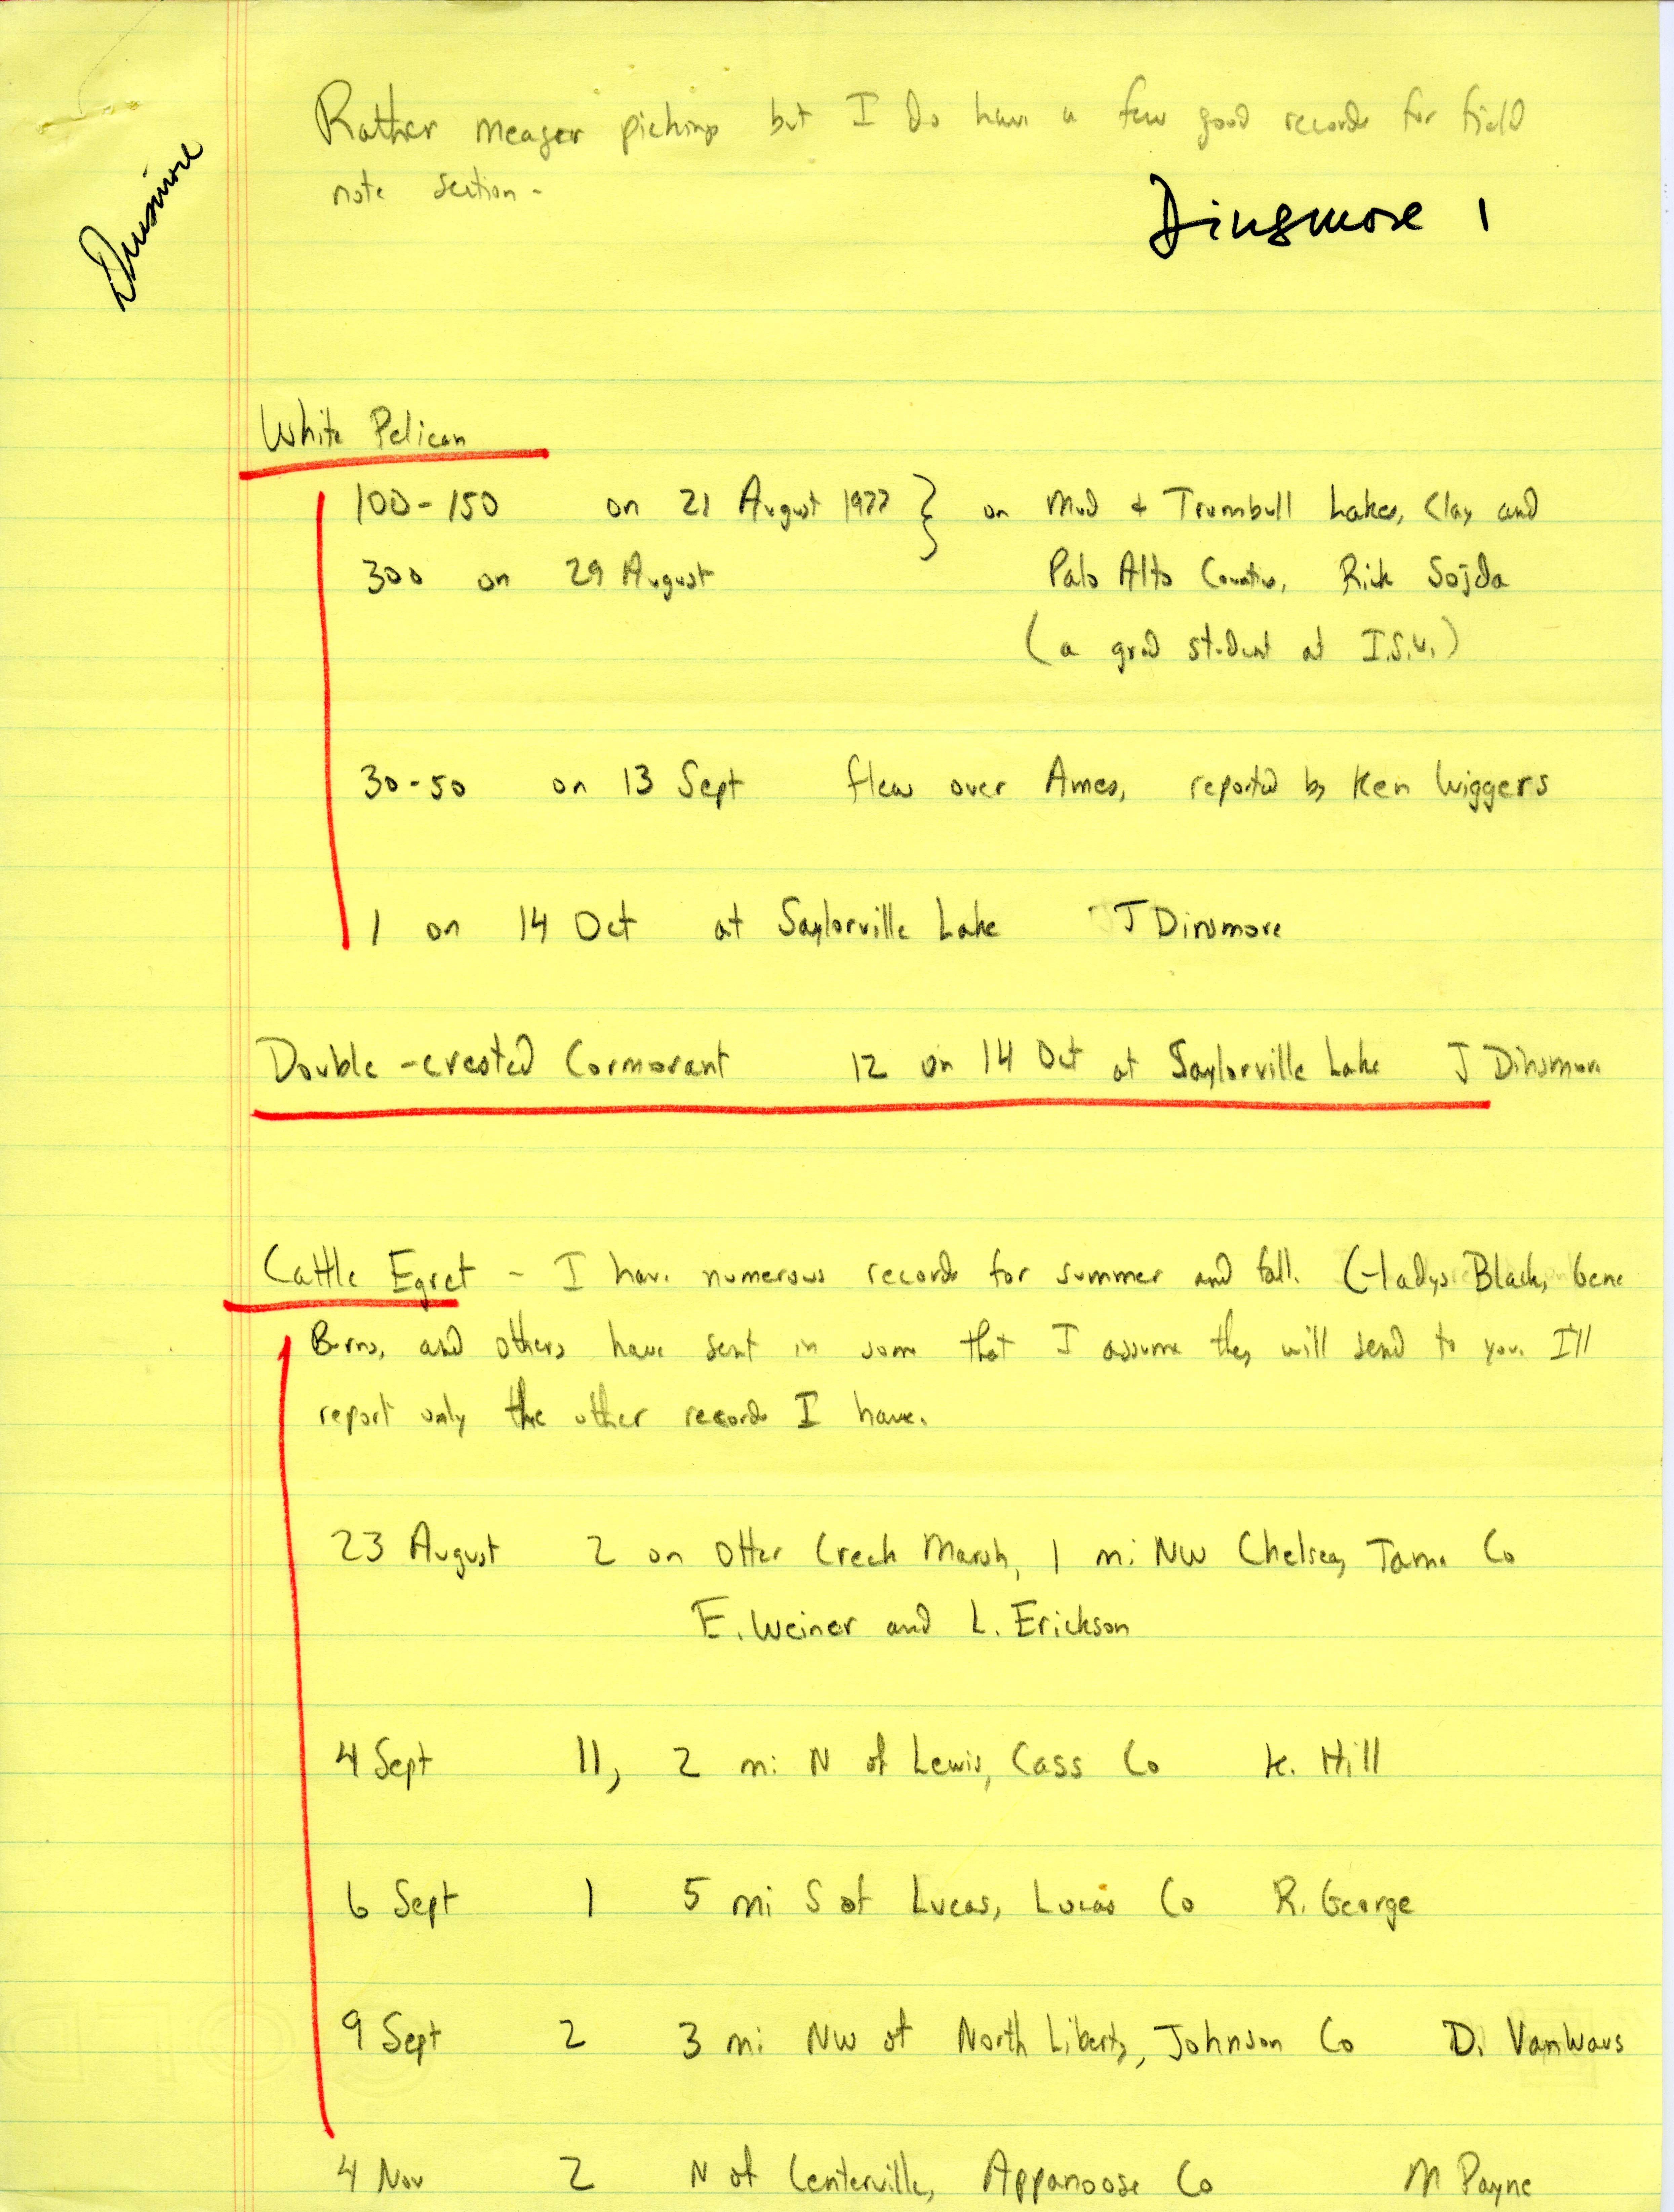 Field notes contributed by James J. Dinsmore, fall 1977